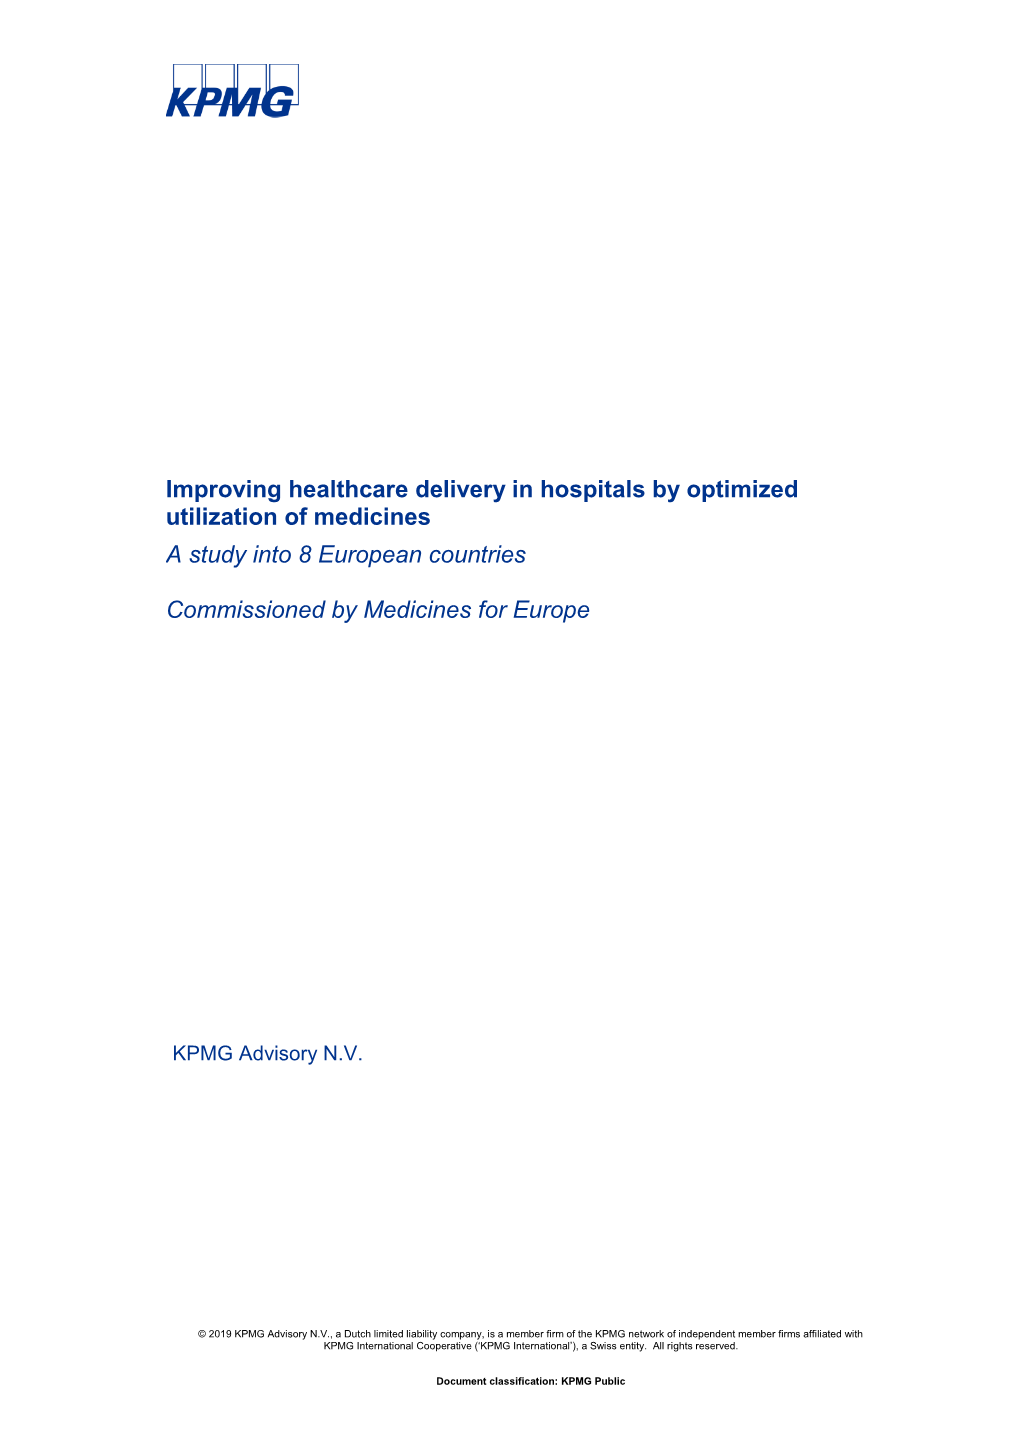 Improving Healthcare Delivery in Hospitals by Optimized Utilization of Medicines a Study Into 8 European Countries